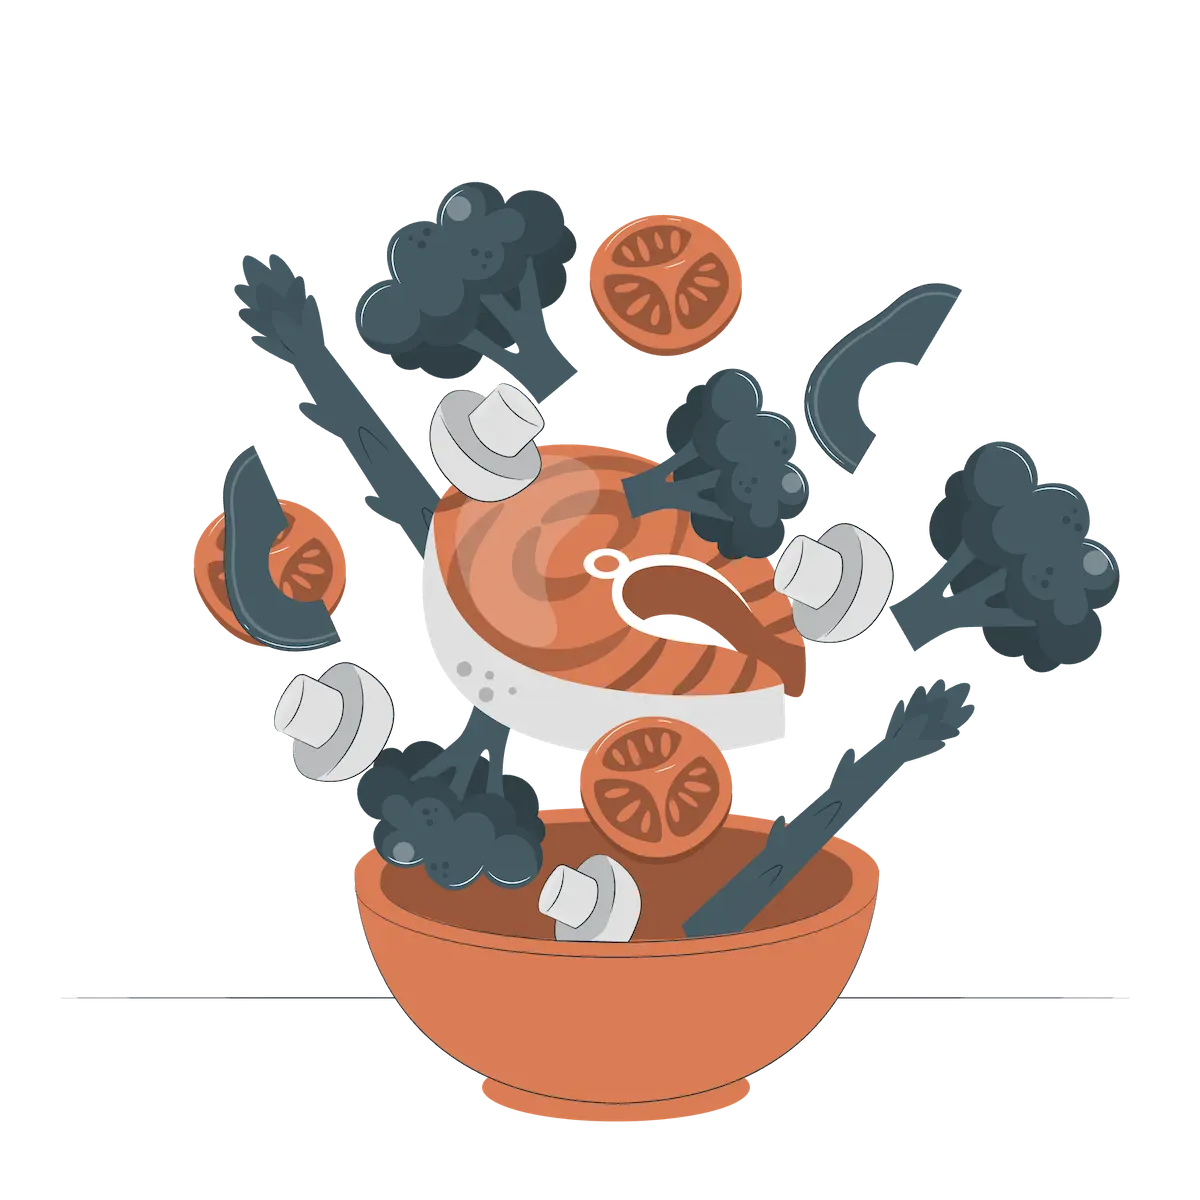 An illustration of a healthy food bowl.